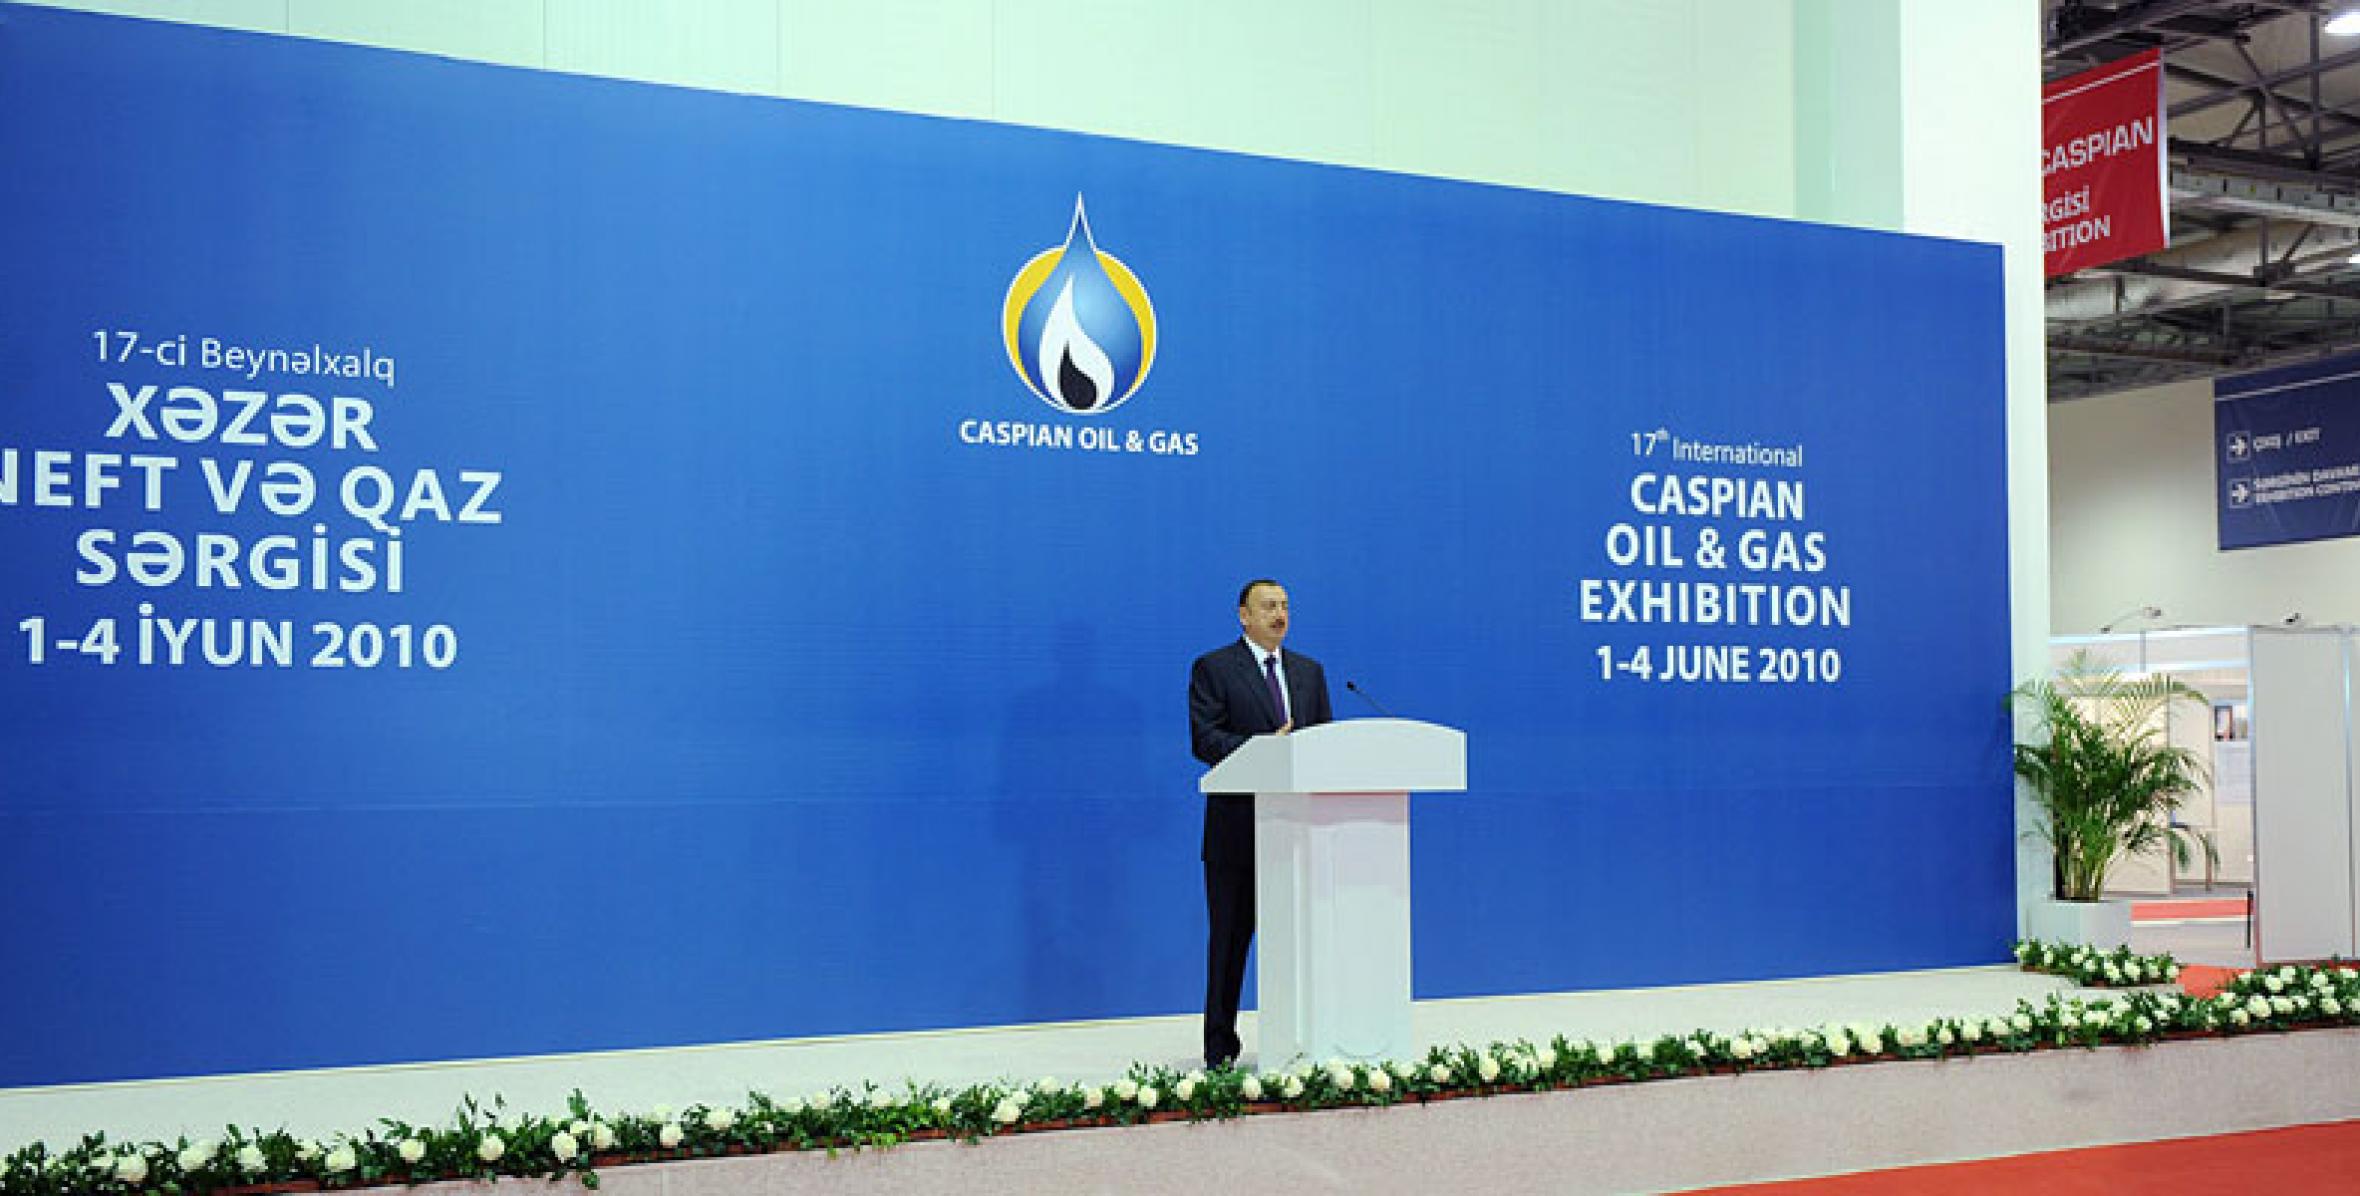 Ilham Aliyev participated at the opening ceremony of the International Caspian Oil & Gas Exhibition and Conference